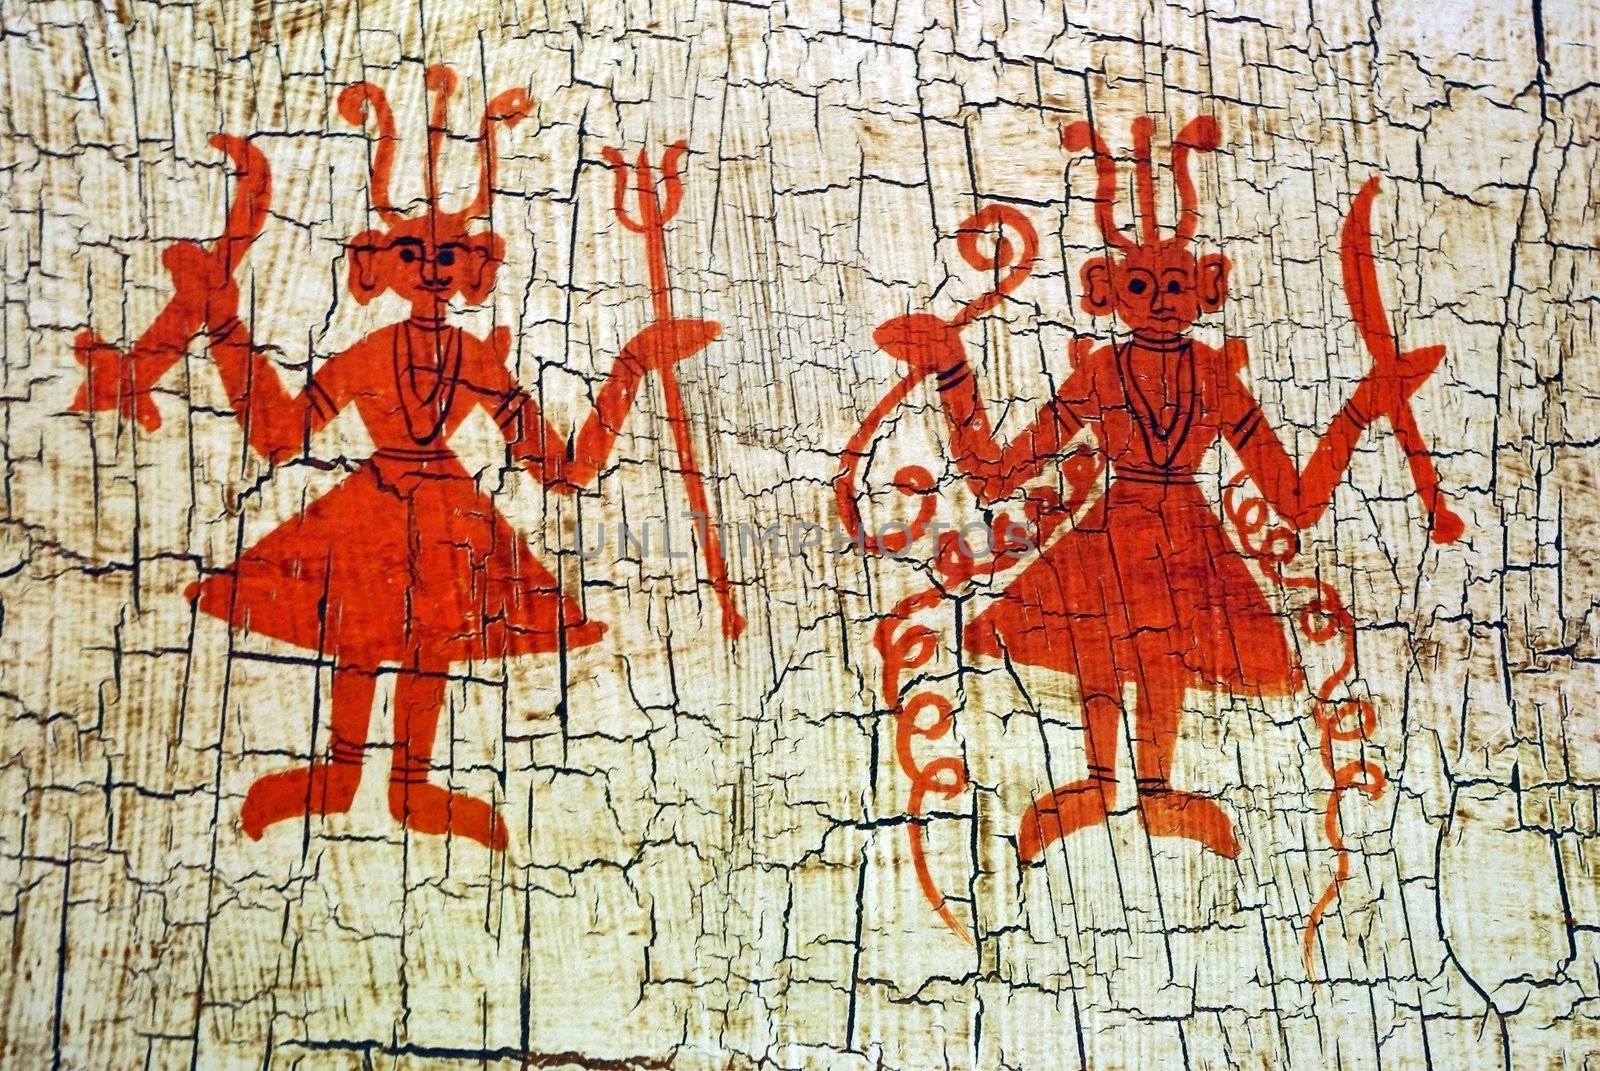 Dancing figures on an aged background. Ethnic indian art.